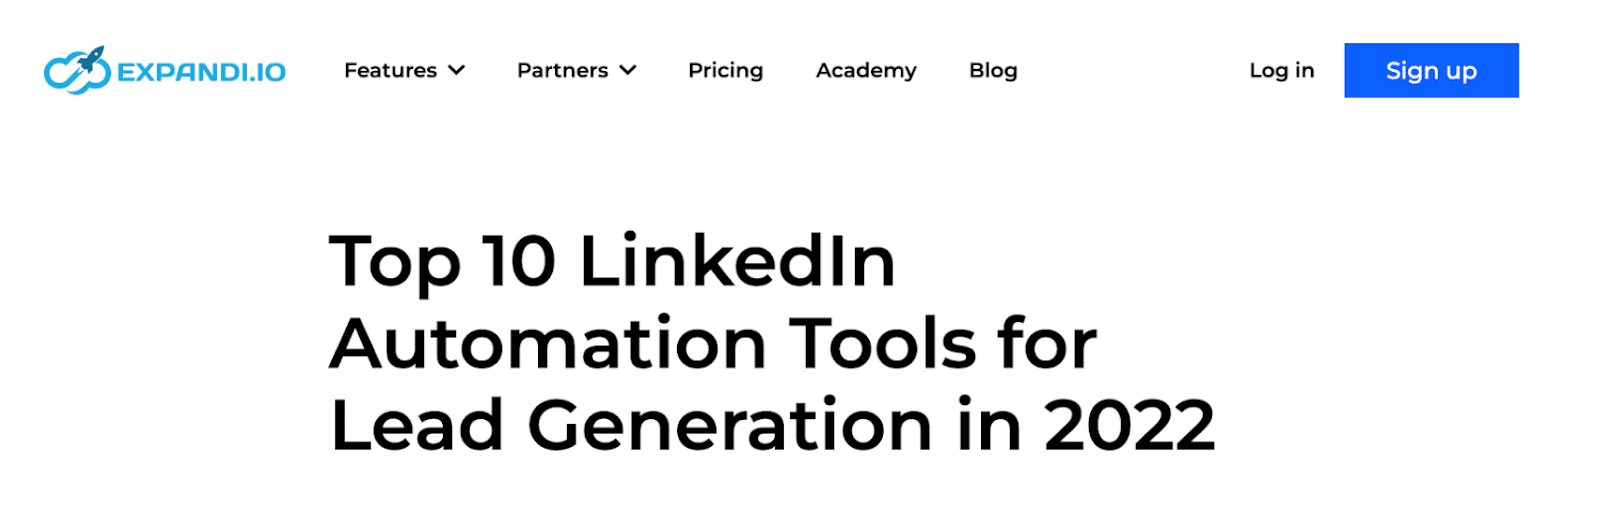 Quoleady's client blog topic: Top 10 automationn tools for lead generation in 2022